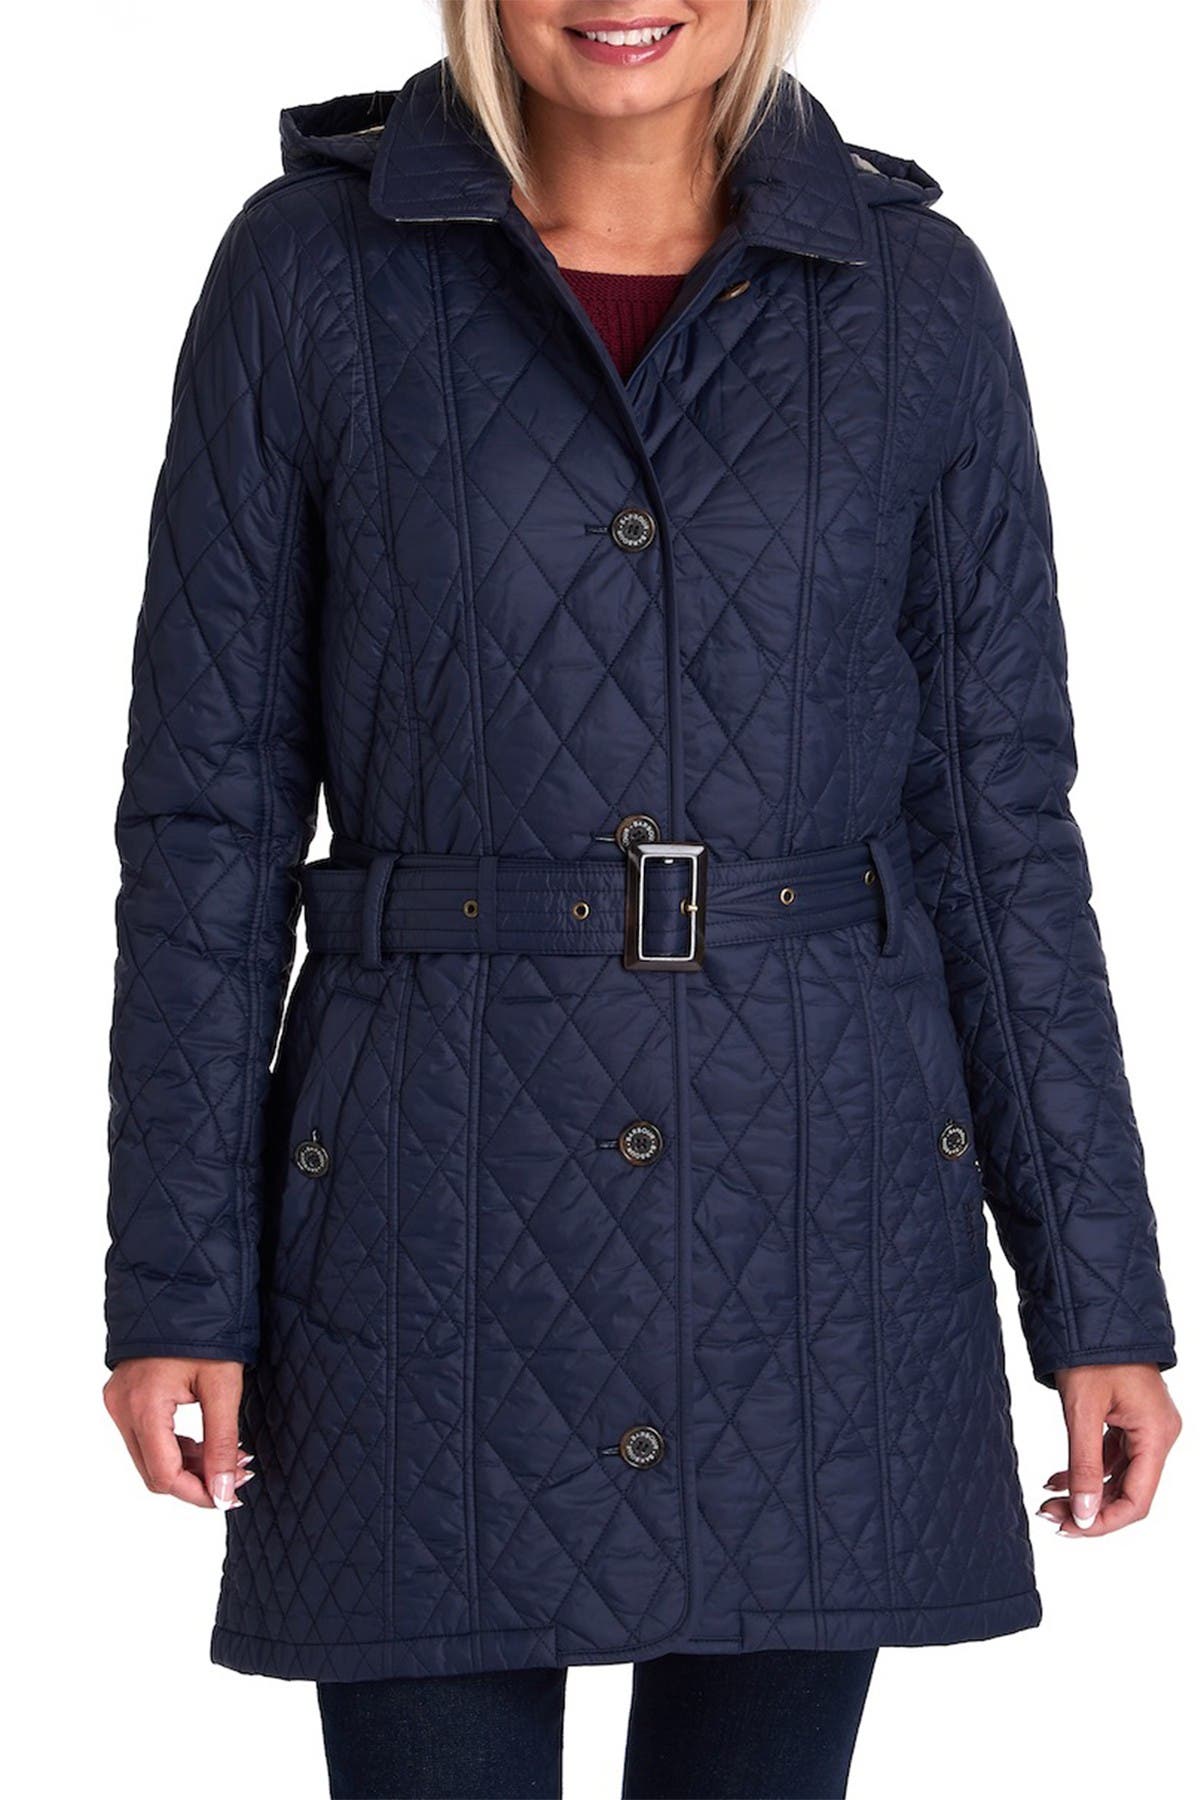 navy quilted barbour jacket womens